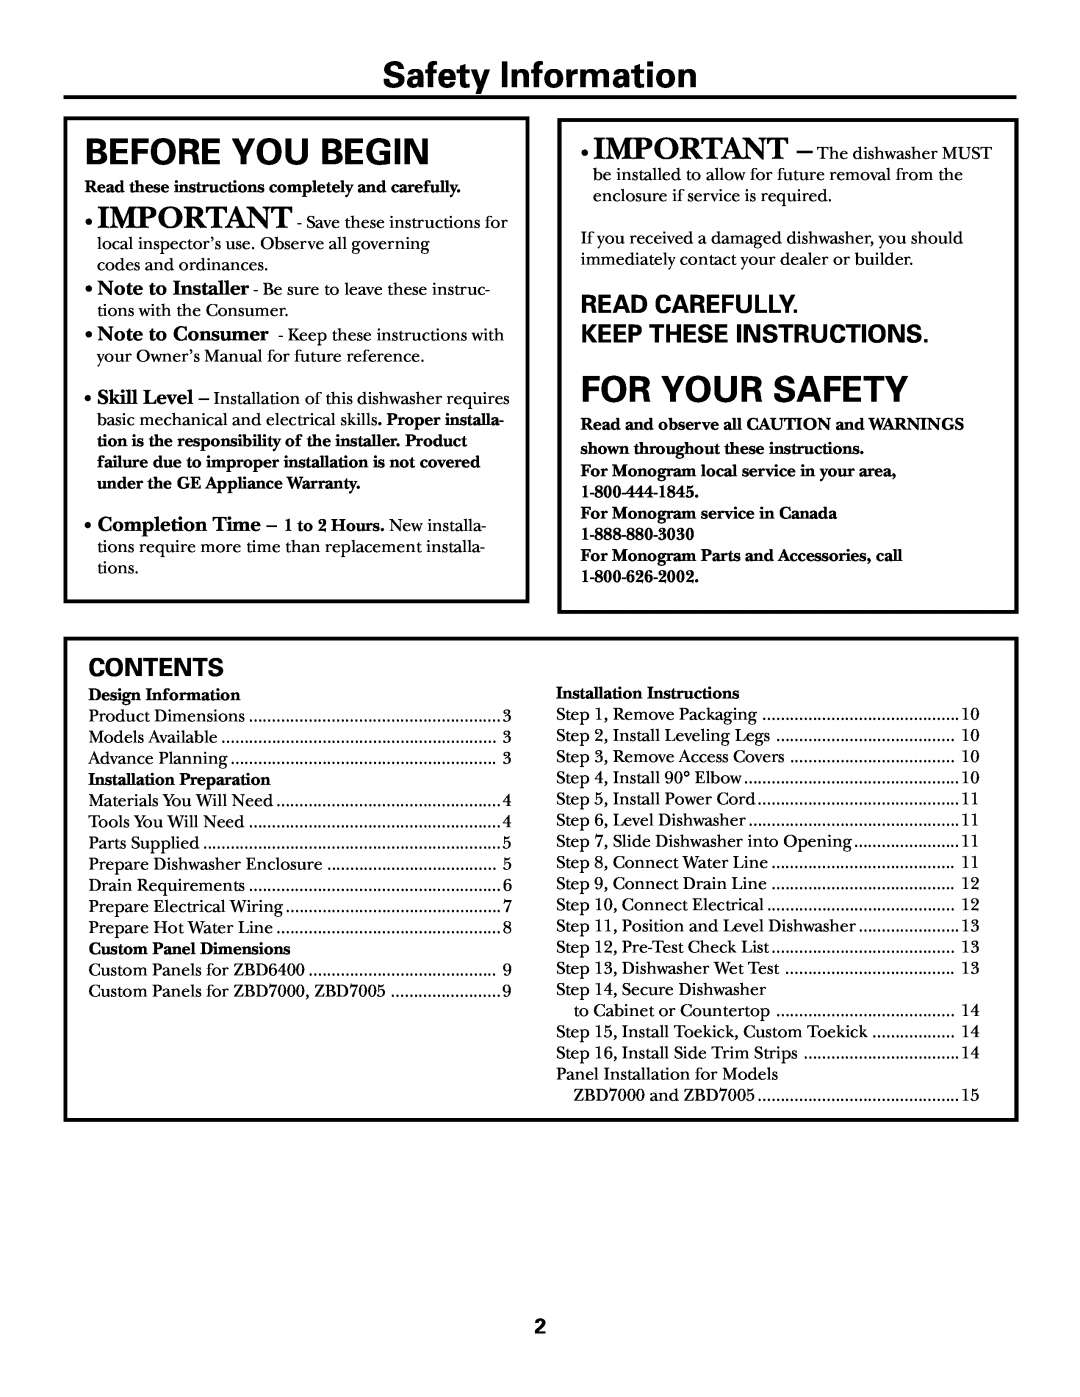 GE ZBD6600 Safety Information, Before You Begin, For Your Safety, Read Carefully Keep These Instructions, Contents 